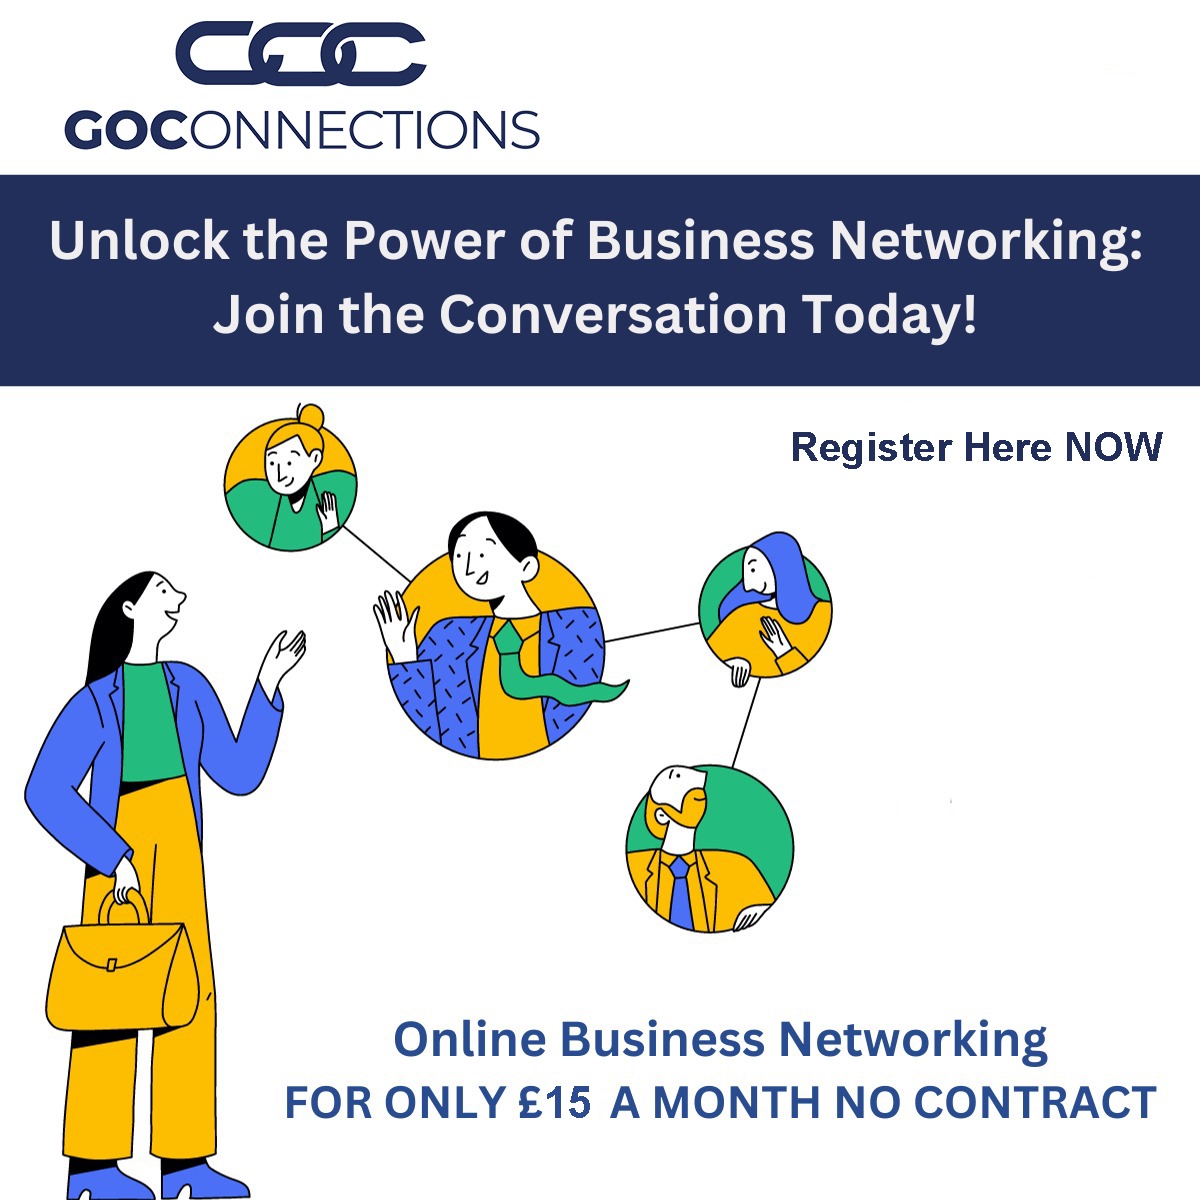 Looking for a supportive network of like-minded entrepreneurs?

Look no further than Go Connections!

#CommunityOverCompetition #NetworkingGoals #GoConnections